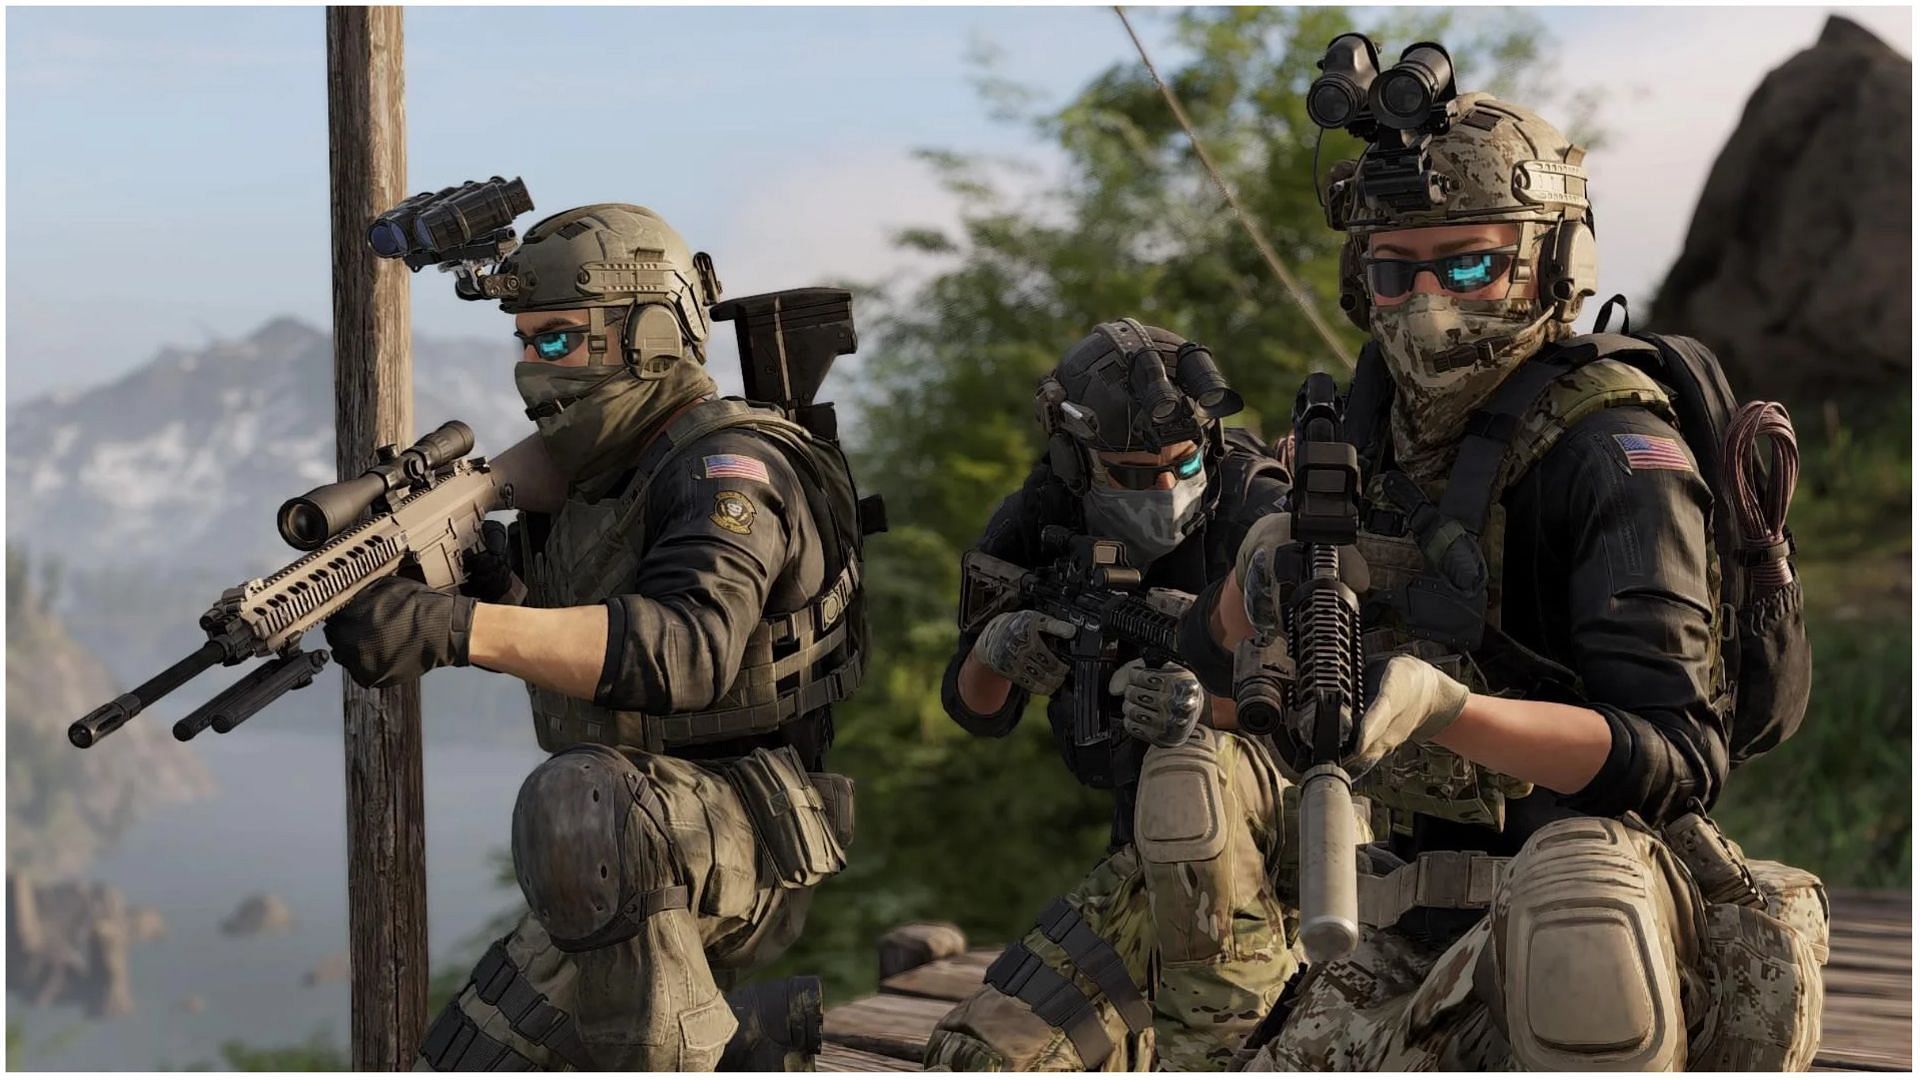 The Ghosts get ready in Ghost Recon Breakpoint (Image via Ubisoft)